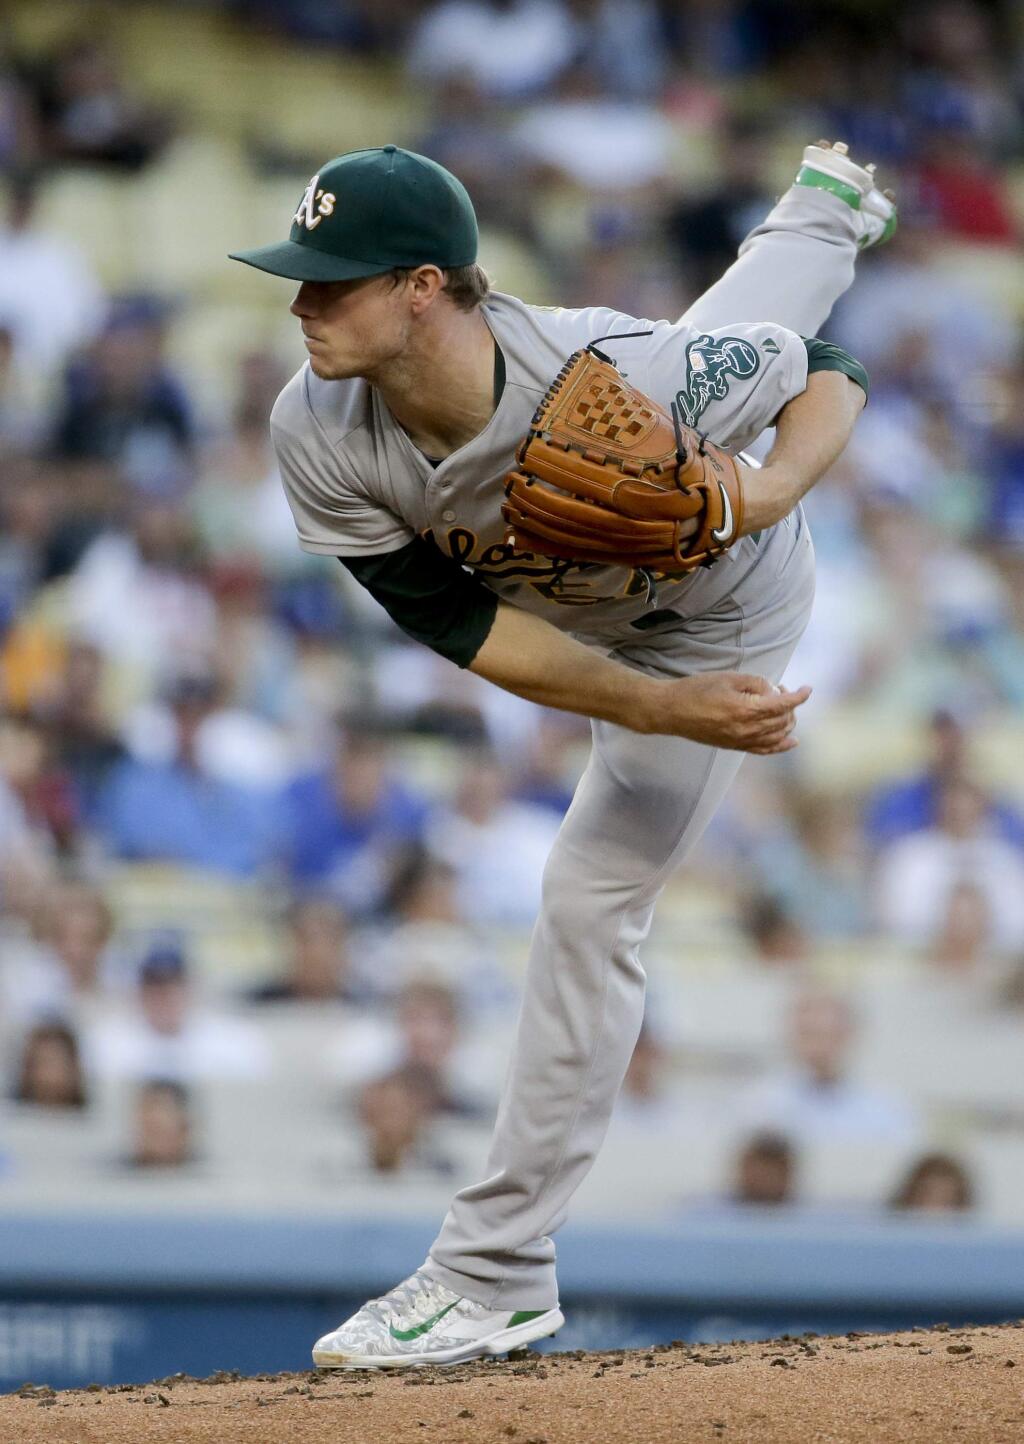 Oakland Athletics starting pitcher Sonny Gray throws against the Los Angeles Dodgers during the first inning of a baseball game in Los Angeles, Tuesday, July 28, 2015. (AP Photo/Chris Carlson)